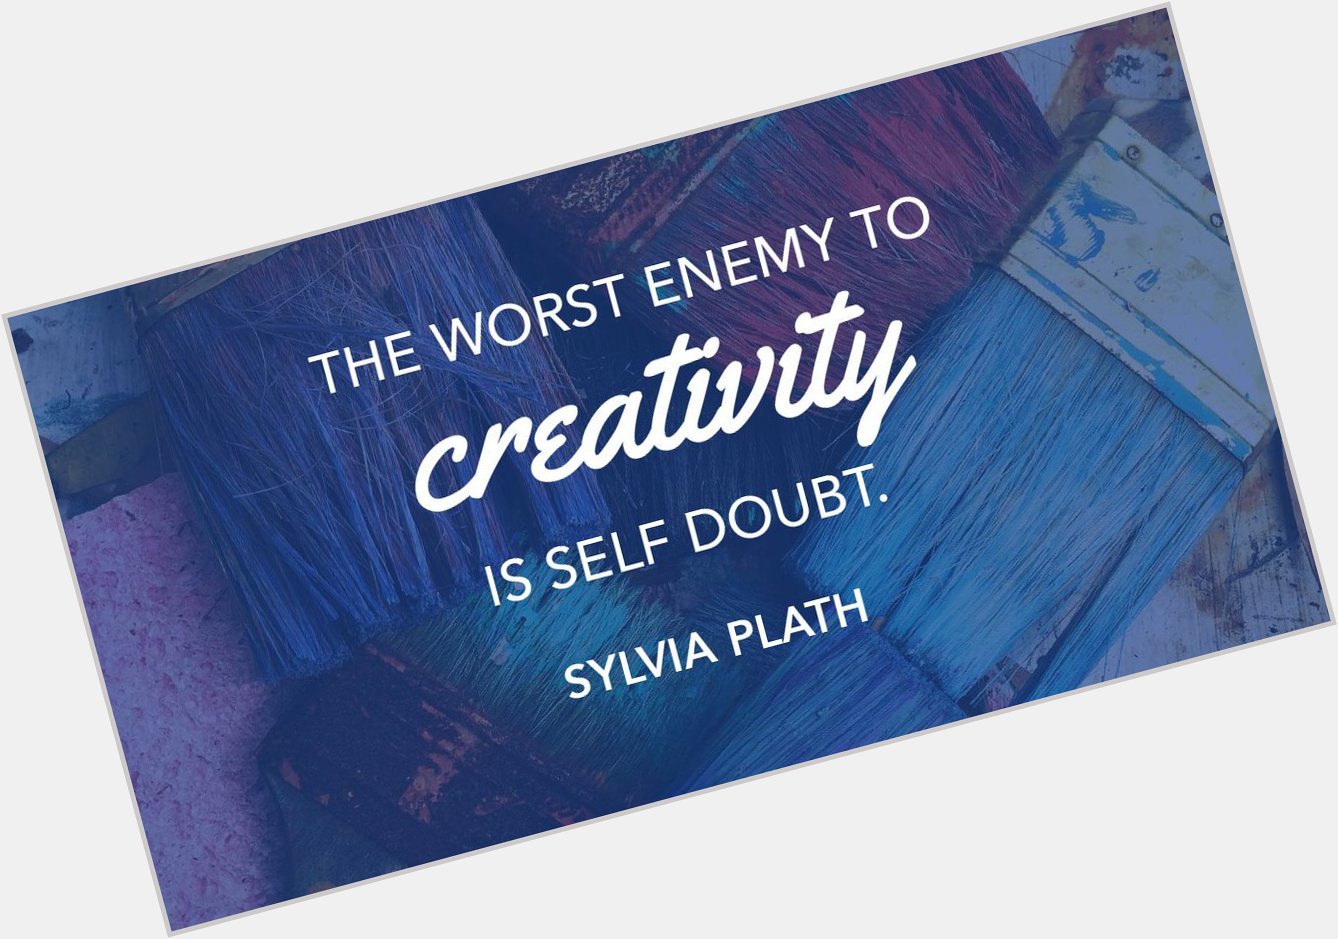 Happy Birthday, Sylvia Plath! Thank you for the wise words and motivation for this week. 